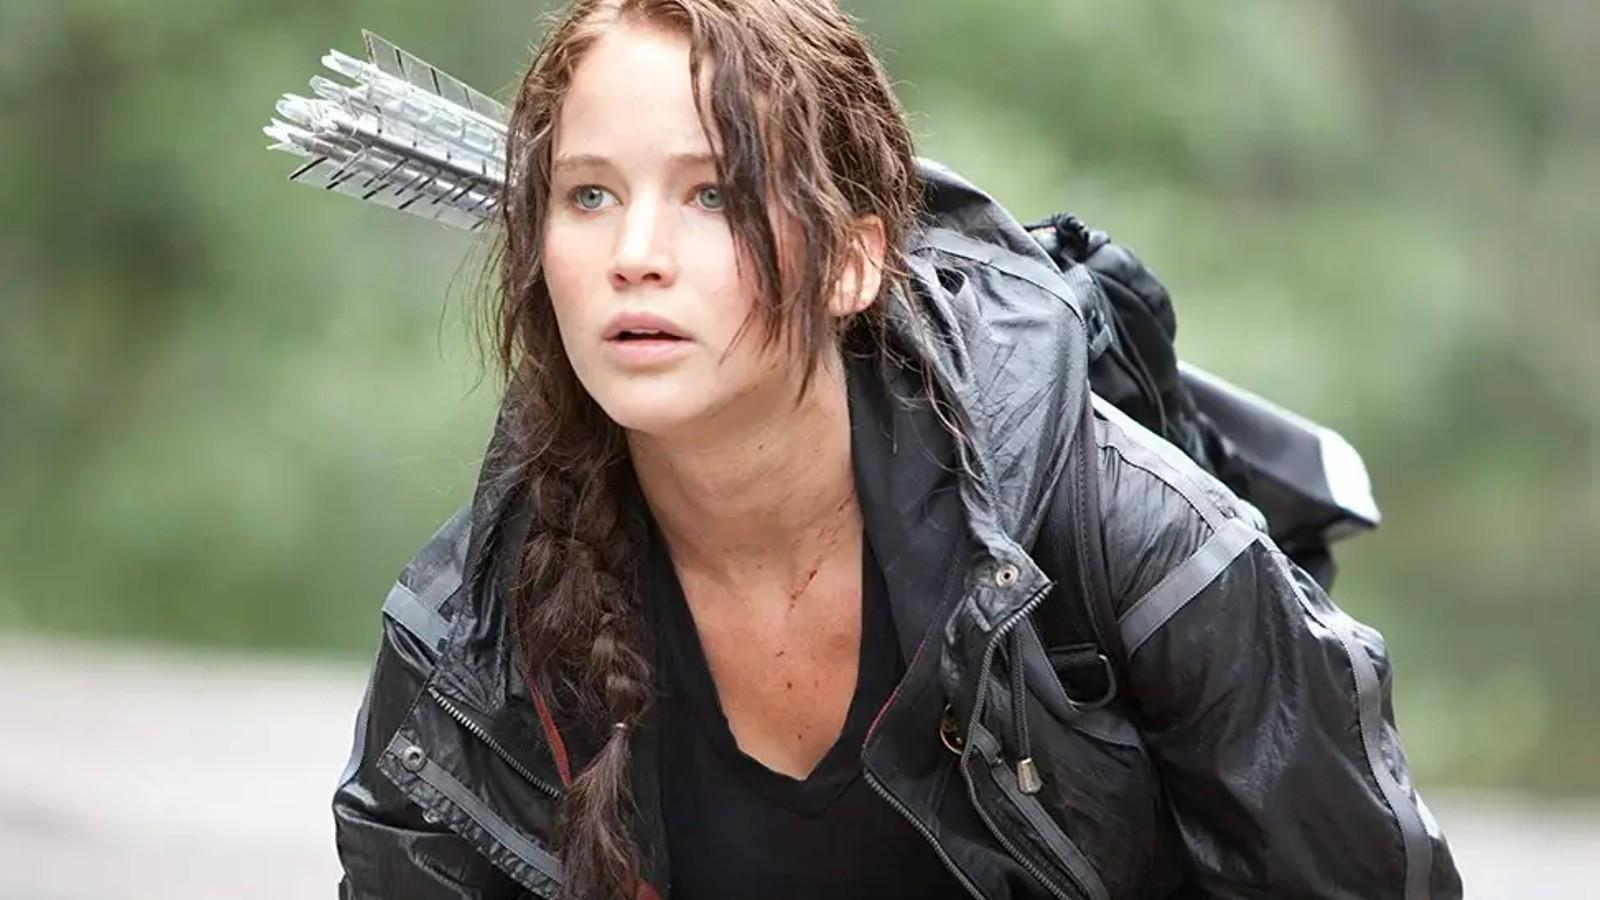 Jennifer Lawrence as Katinss Everdeen competing in The Hunger Games.